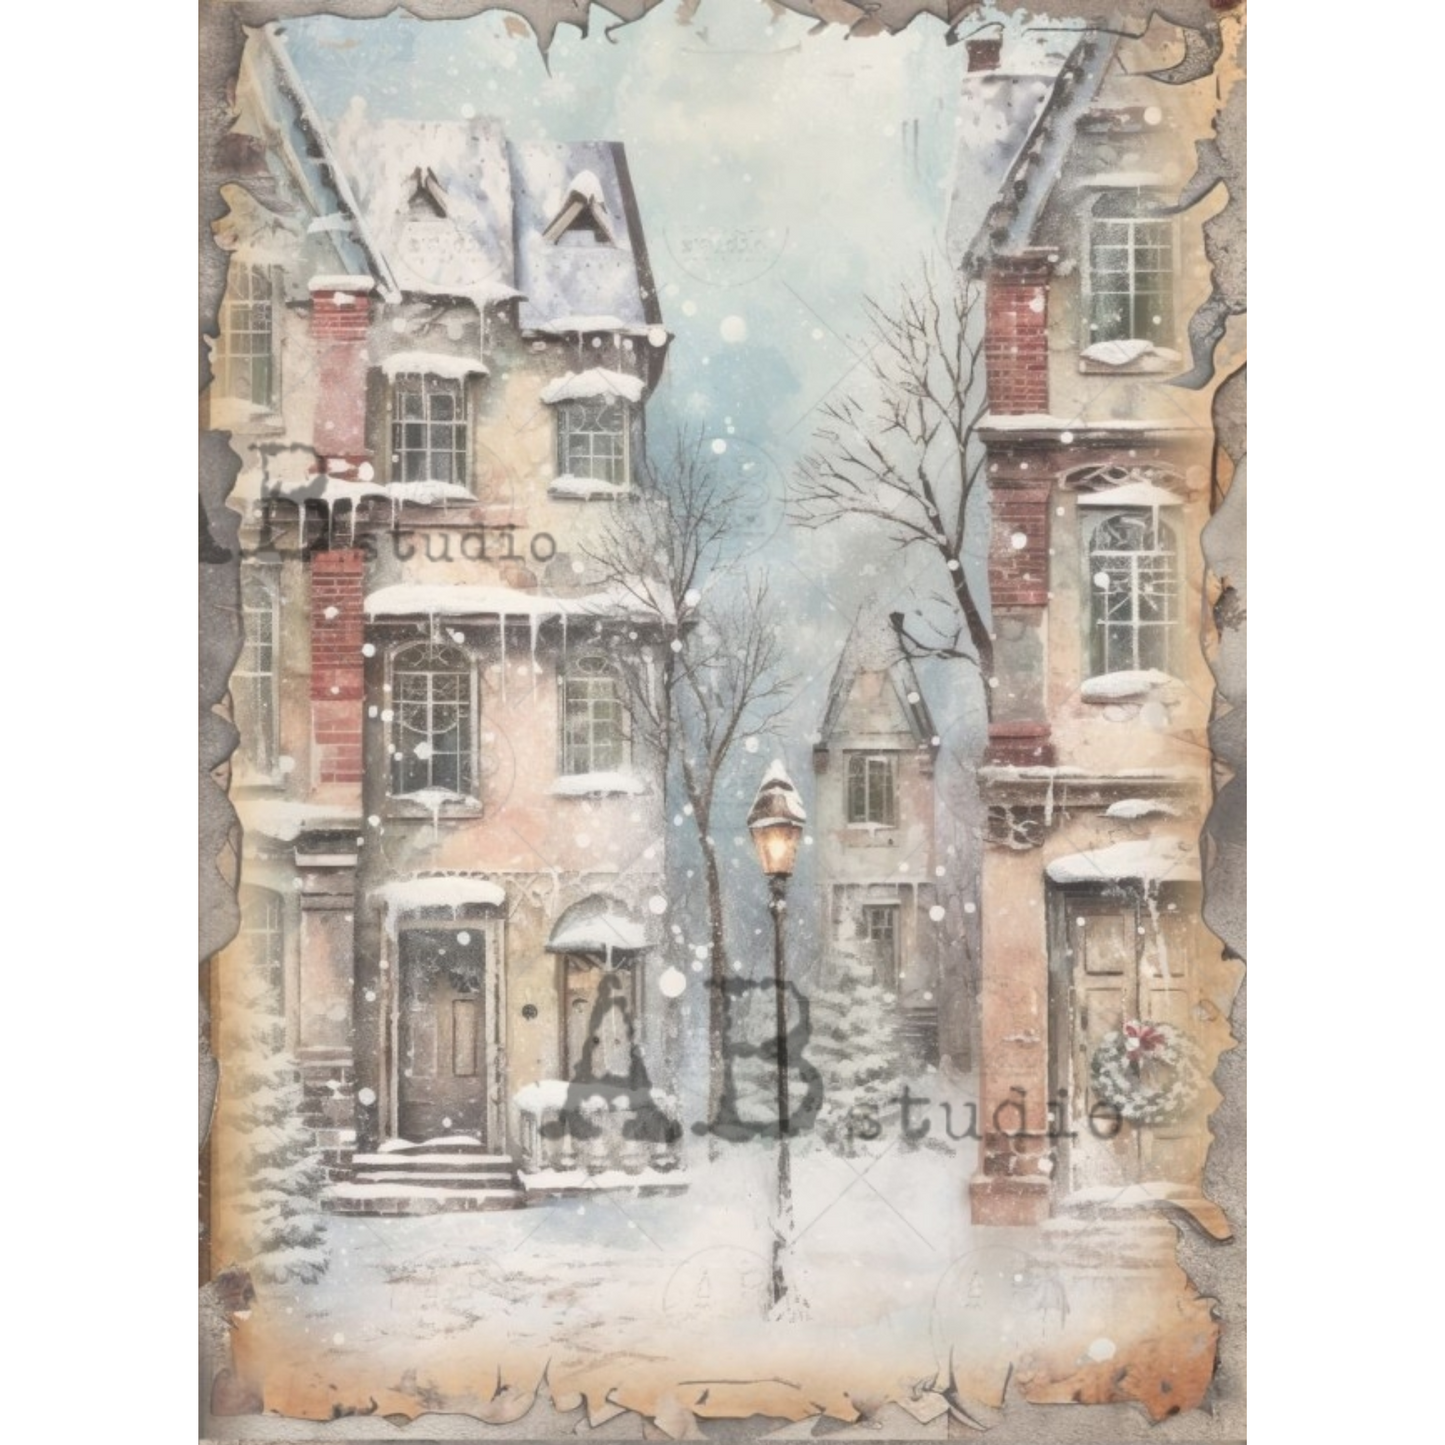 "Winter city View" decoupage rice paper by AB Studio. Available at Milton's Daughter.